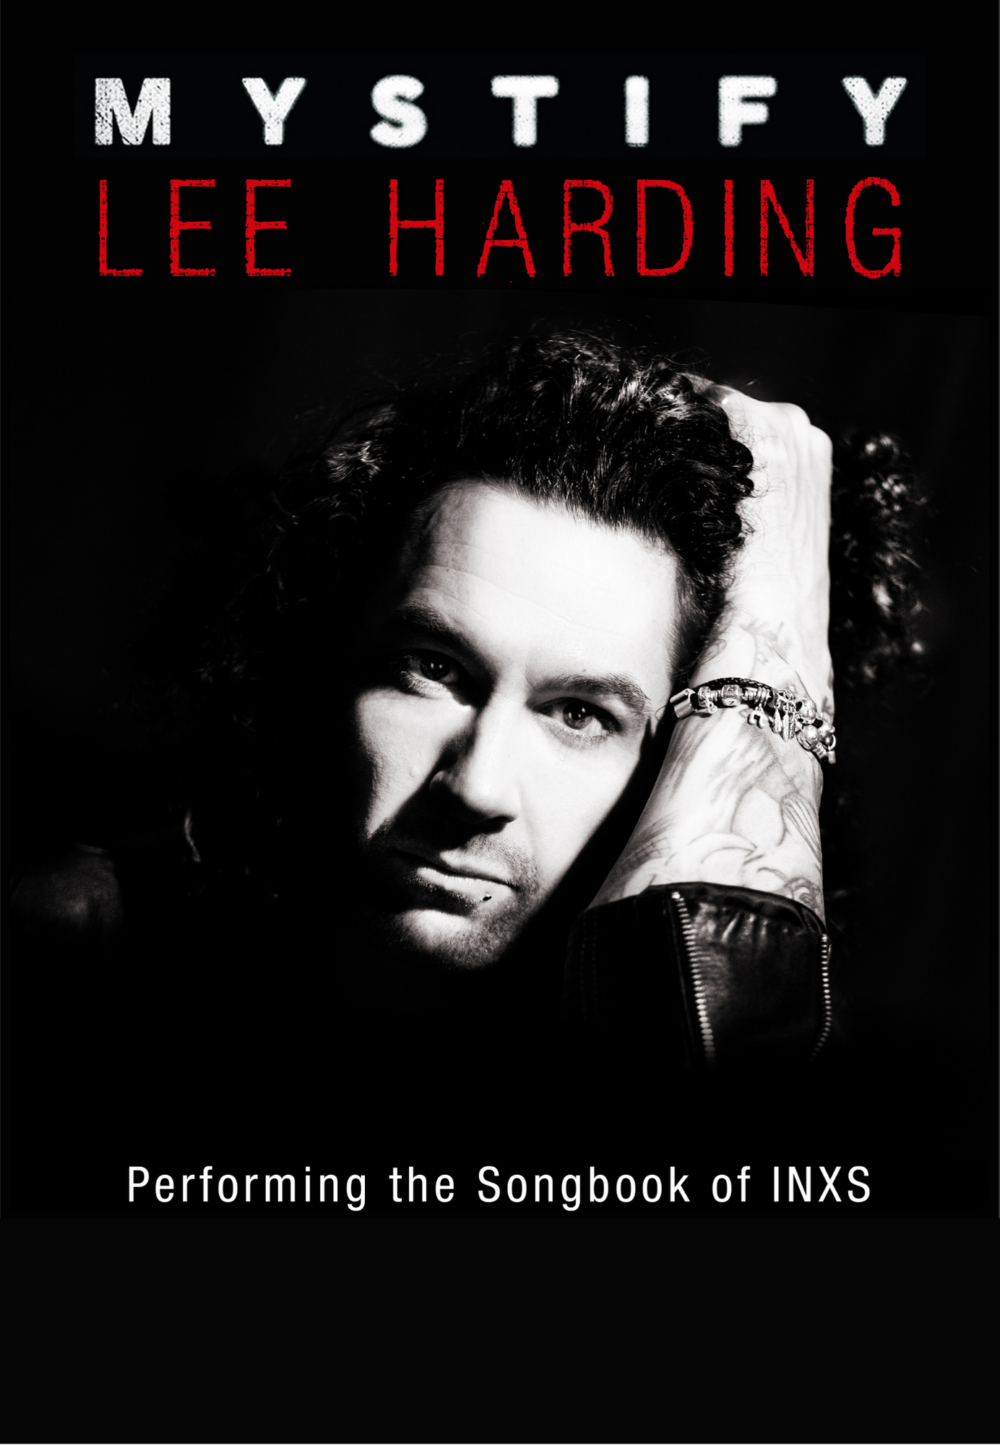 (SOLD OUT) MYSTIFY - The Songbook Of INXS Featuring Lee Harding